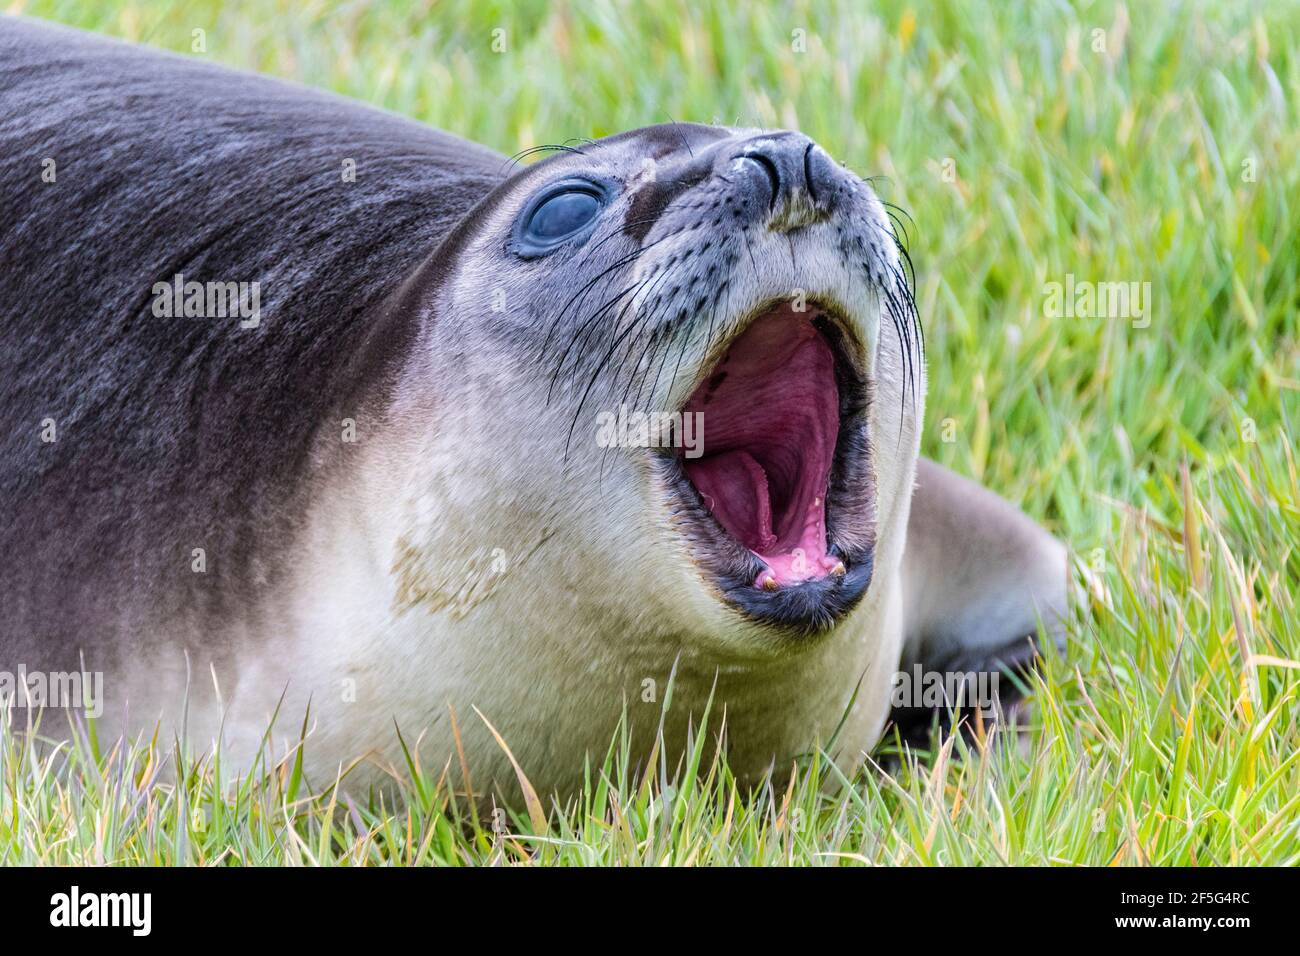 Cute Southern Elephant Seal Pup, Mirounga leonina, vocalizing with mouth open, Sea Lion Island, in the Falkland Islands, South Atlantic Ocean Stock Photo